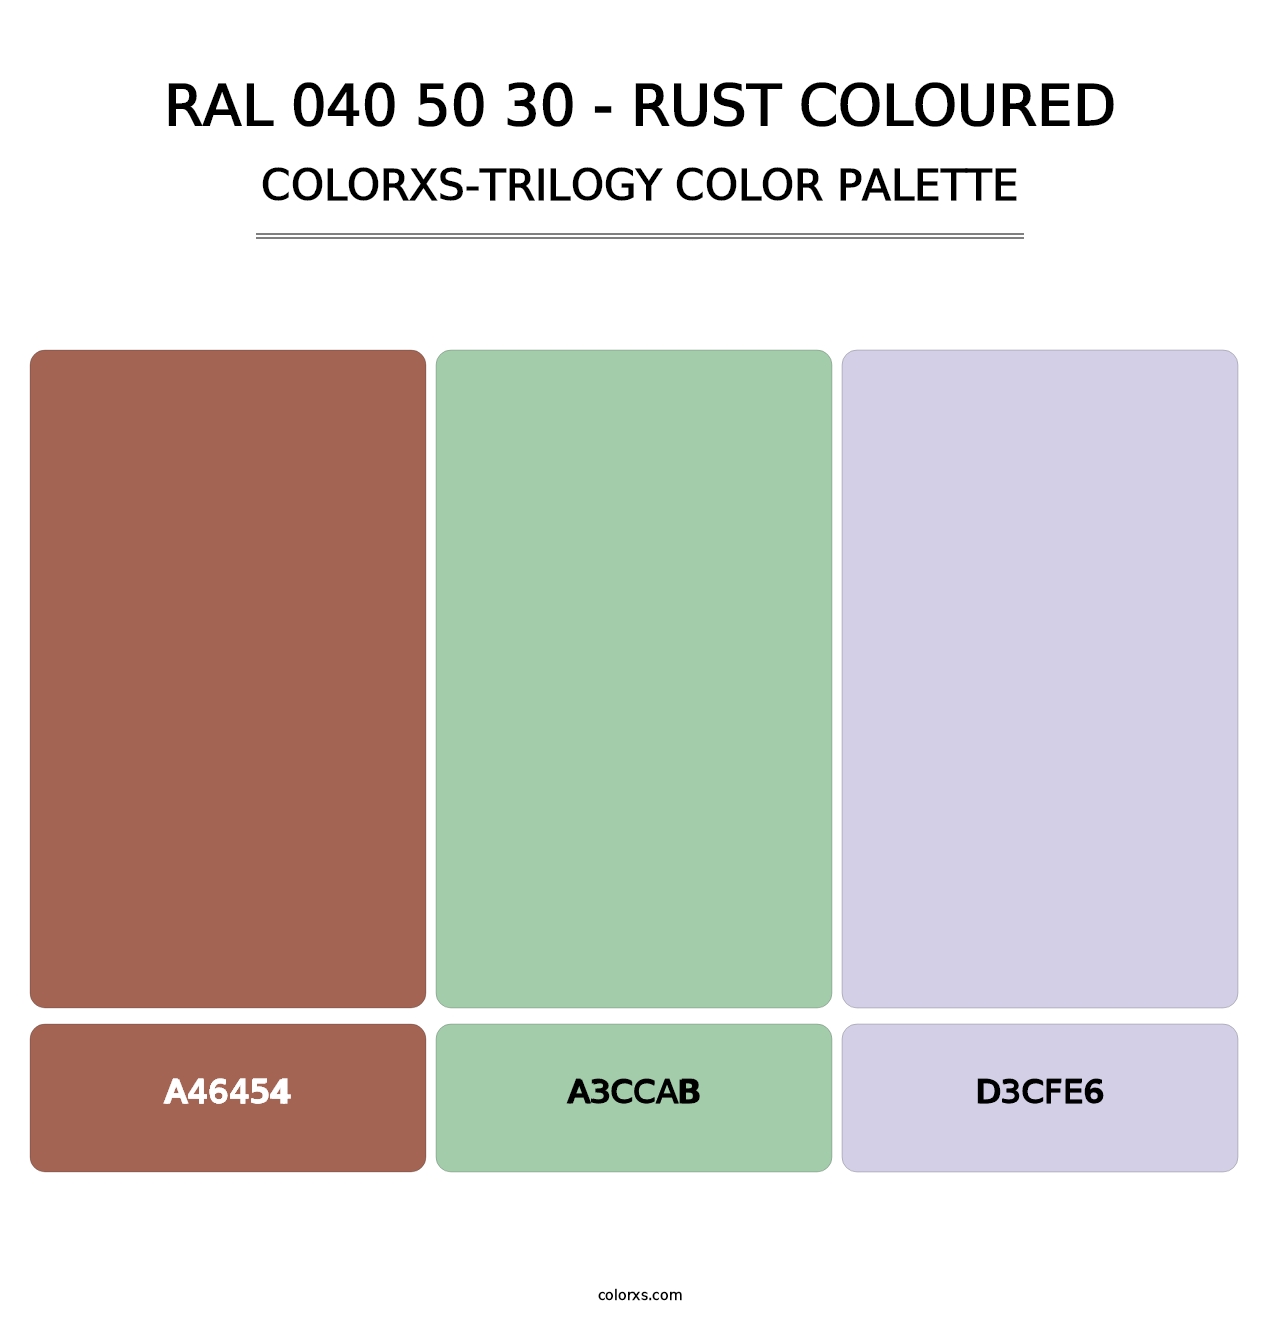 RAL 040 50 30 - Rust Coloured - Colorxs Trilogy Palette